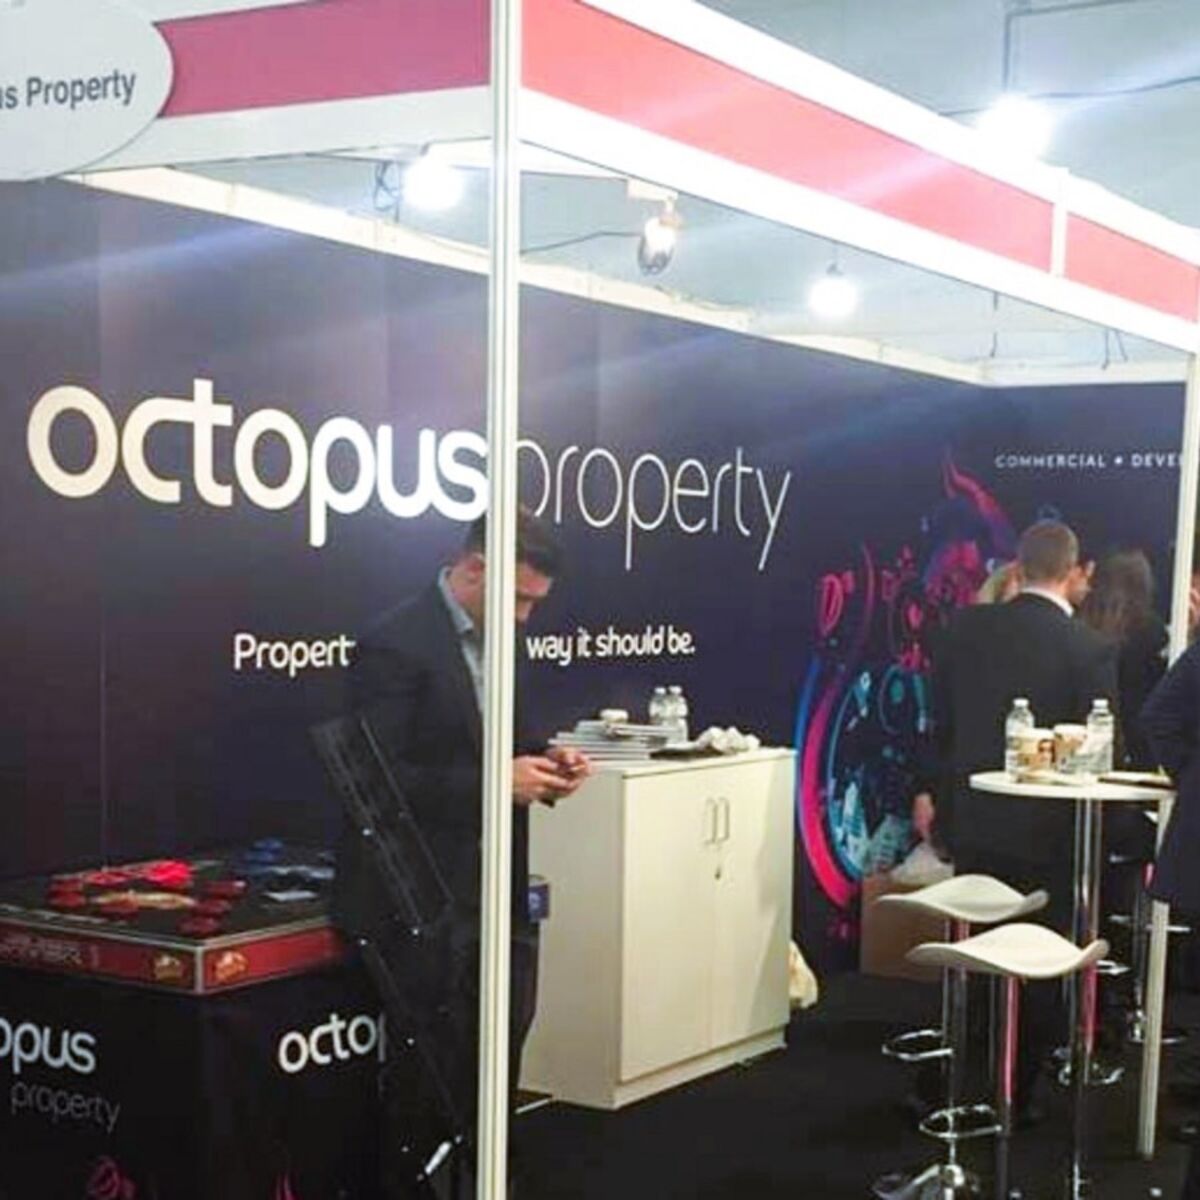 Rigid Board Shell Scheme Exhibition Graphics for Octopus Property 1.jpg